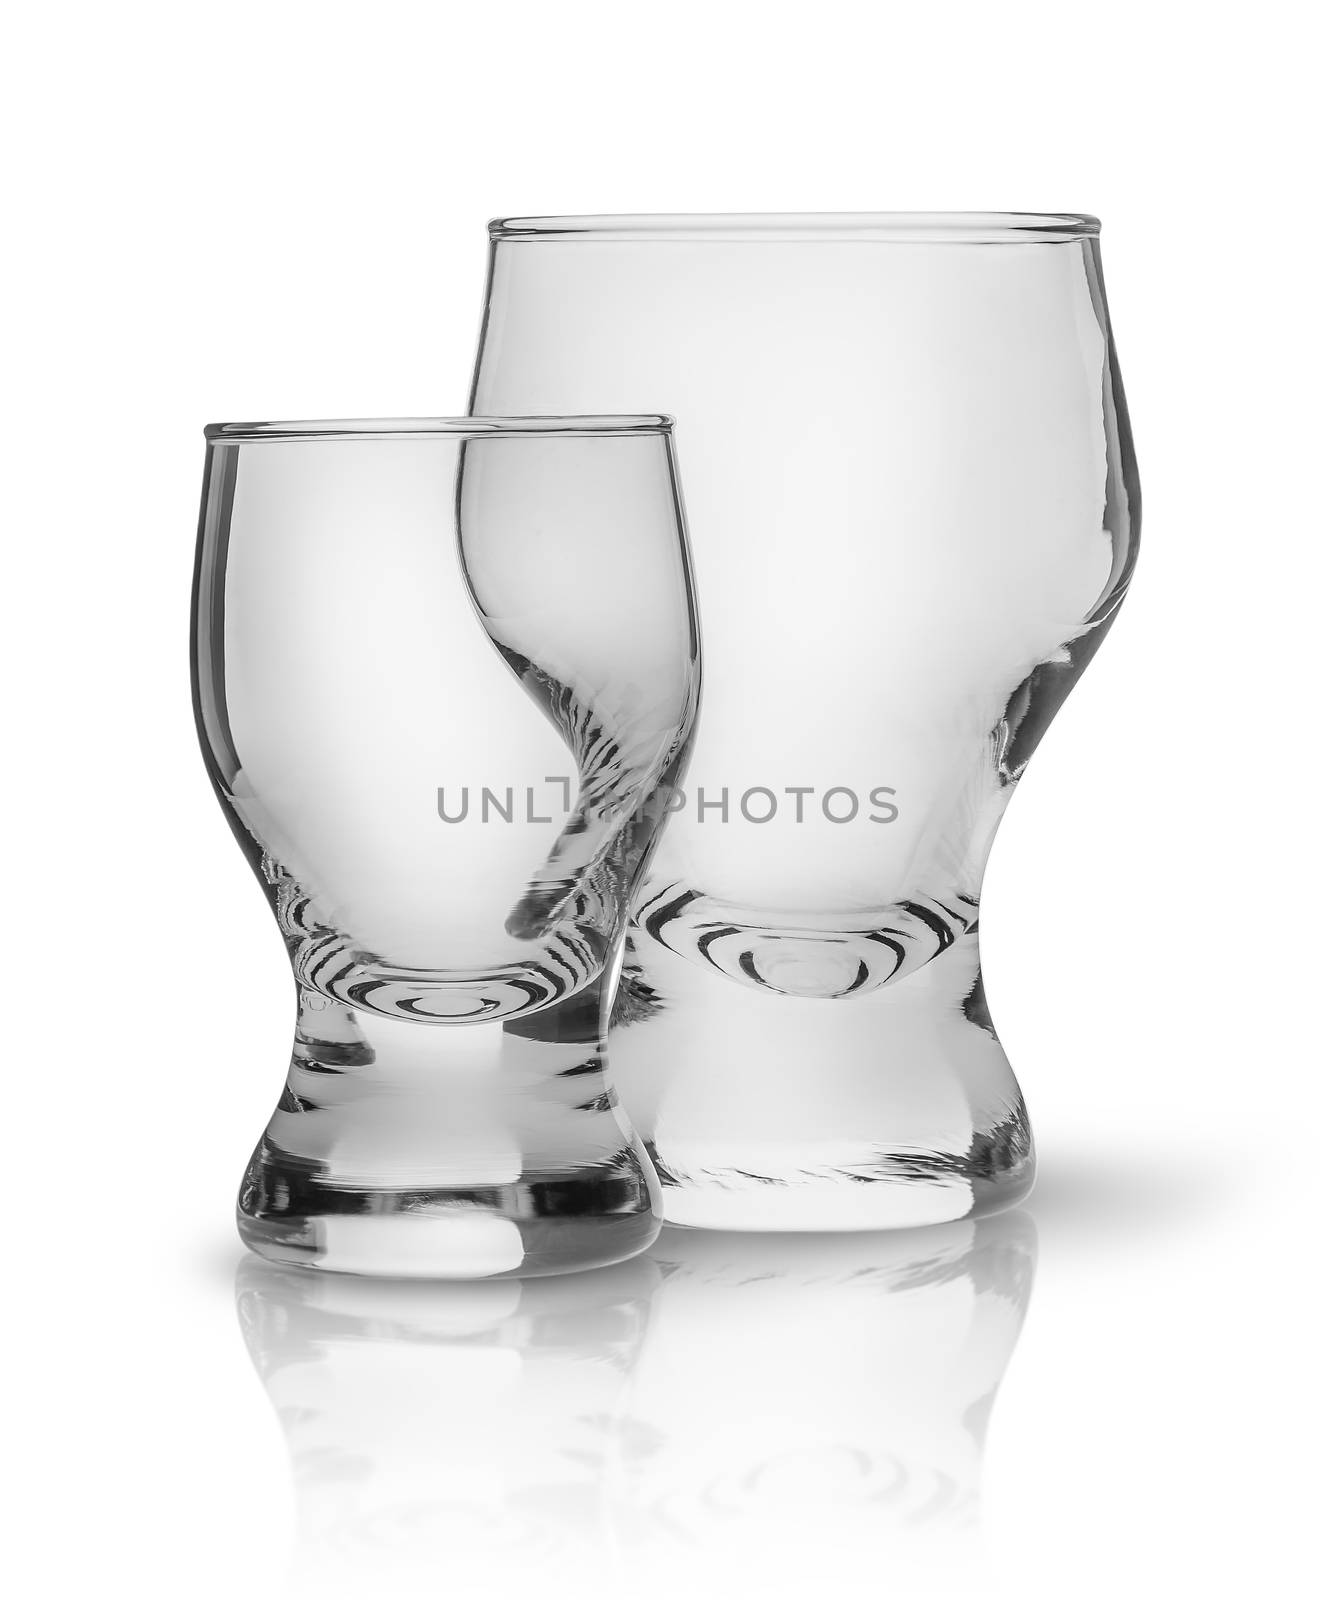 Two glasses side by side by Cipariss